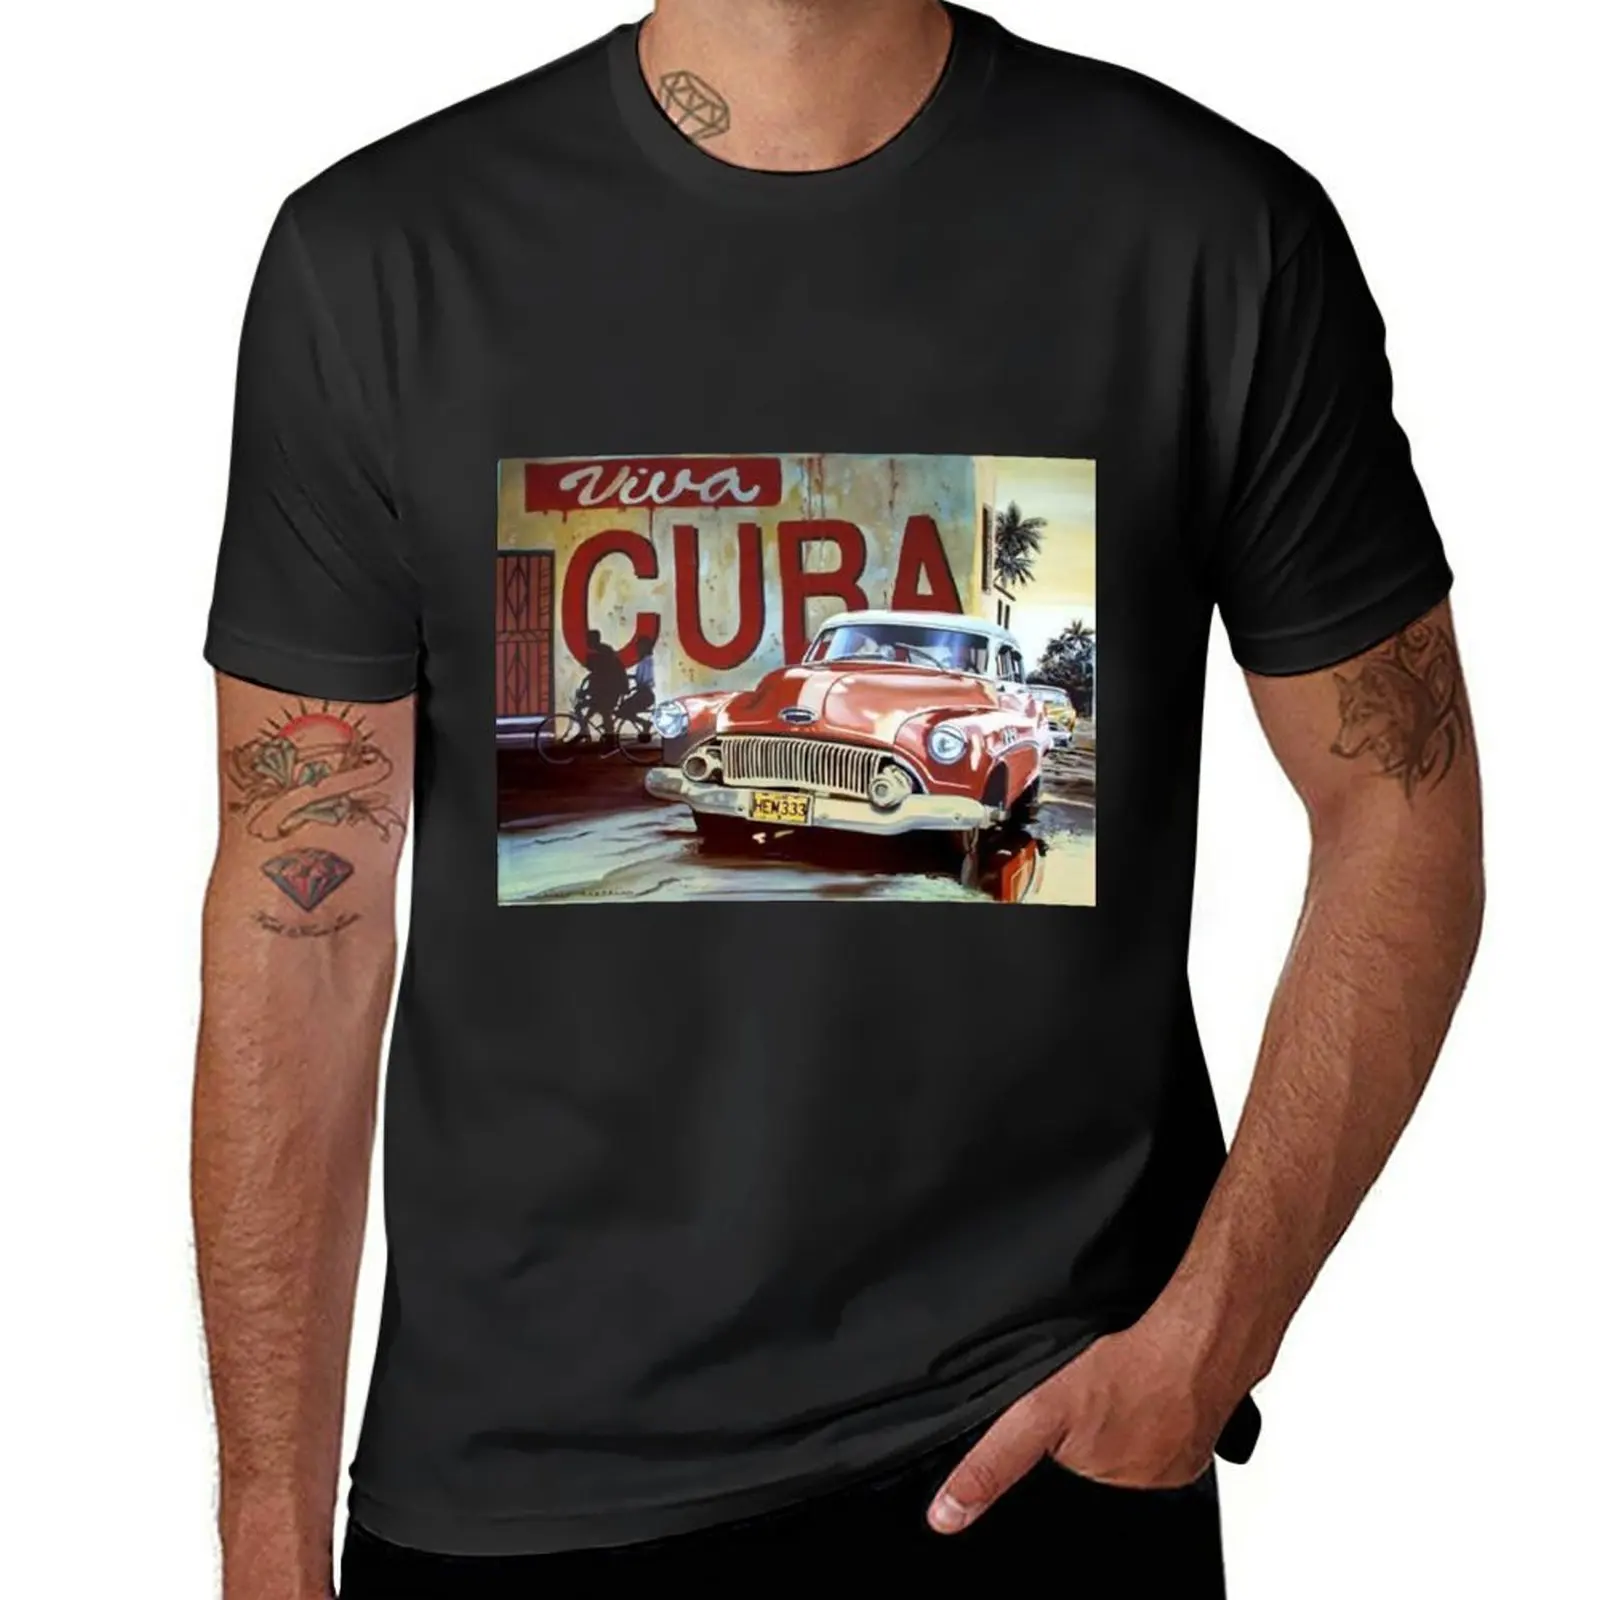 

Viva Cuba T-Shirt vintage clothes Short sleeve tee plus sizes customs design your own mens big and tall t shirts